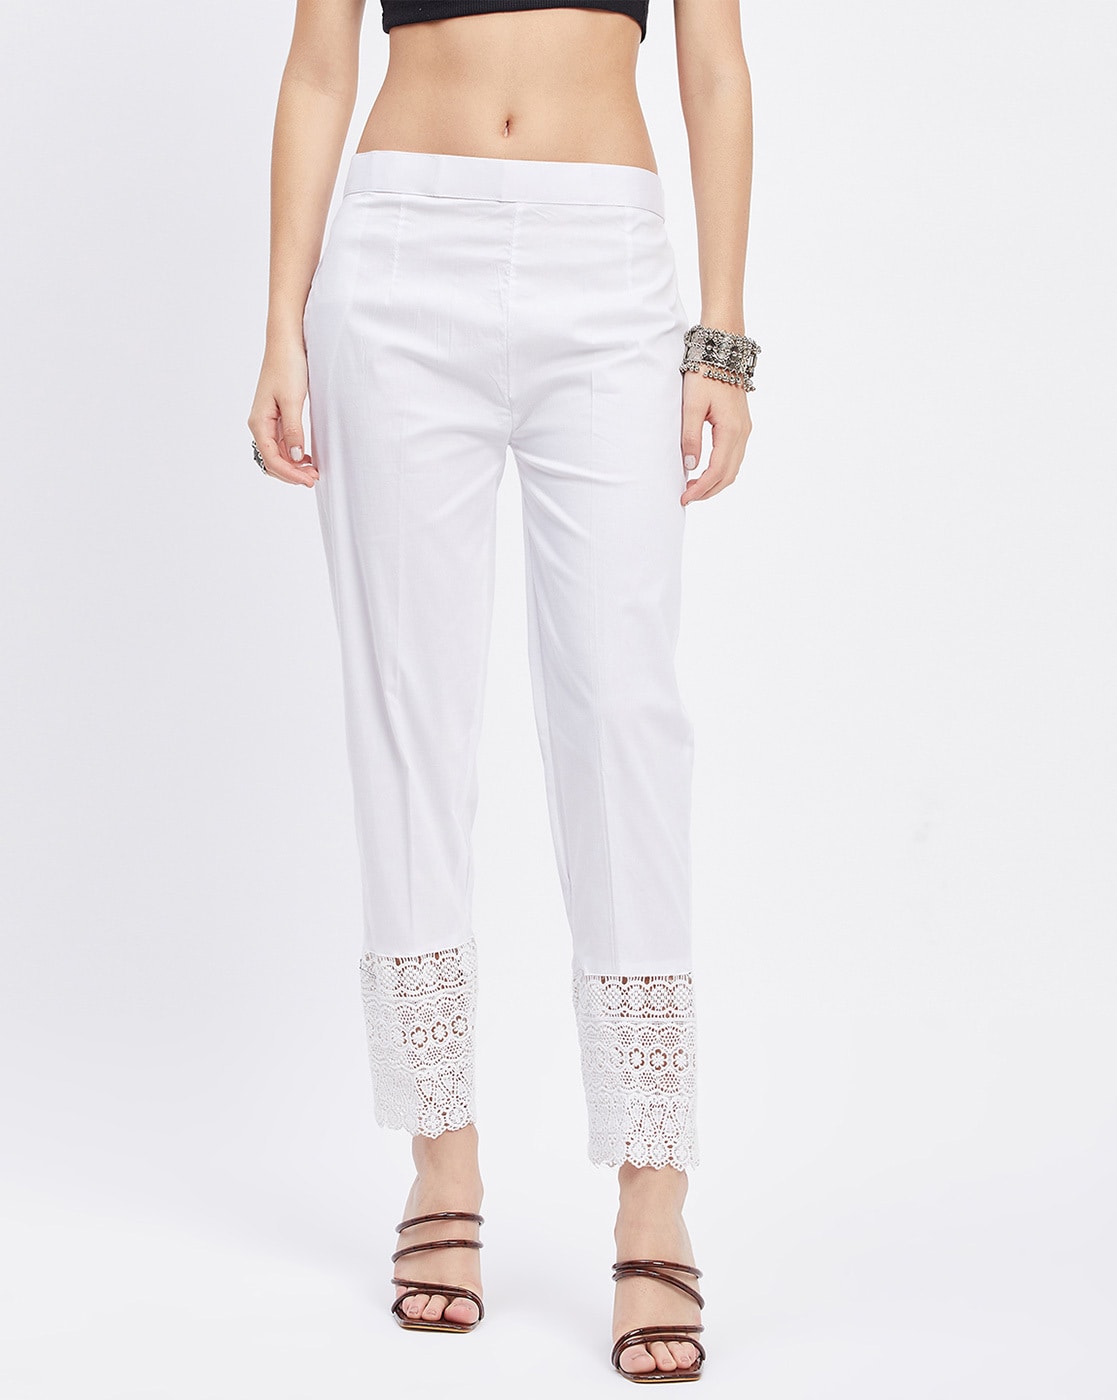 Buy NICE WONDER Womens White Cotton Lycra Trouser Pants with lace  Embroidery Design and Pockets,Size 28 to 42 (28, White) at Amazon.in